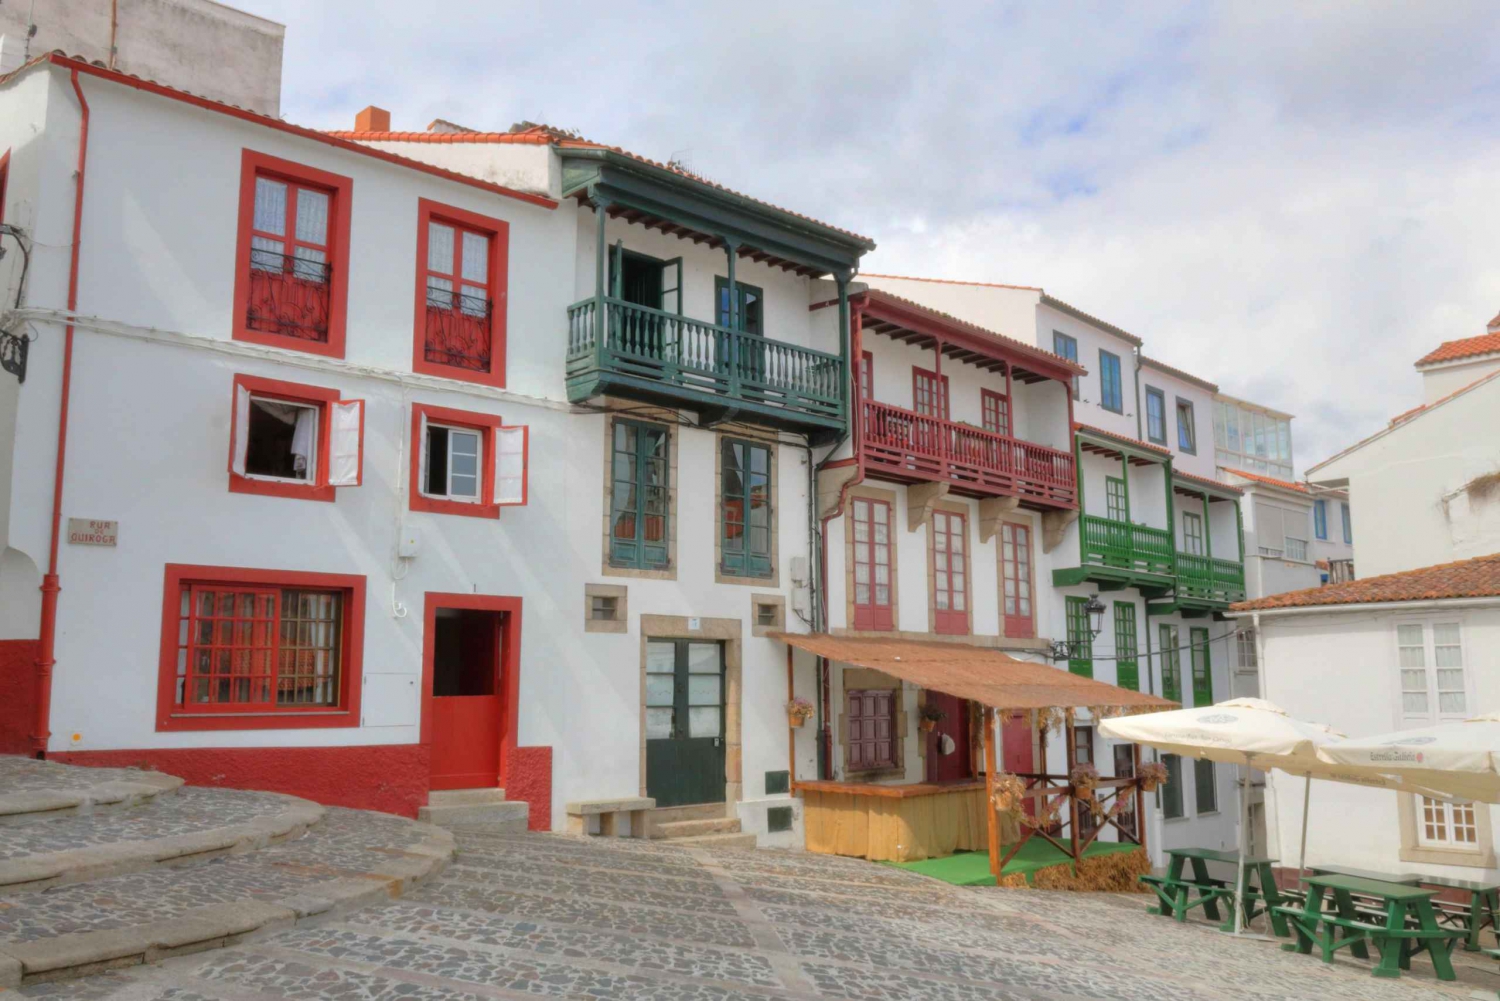 Betanzos: Essential Tour of the city's emblematic places